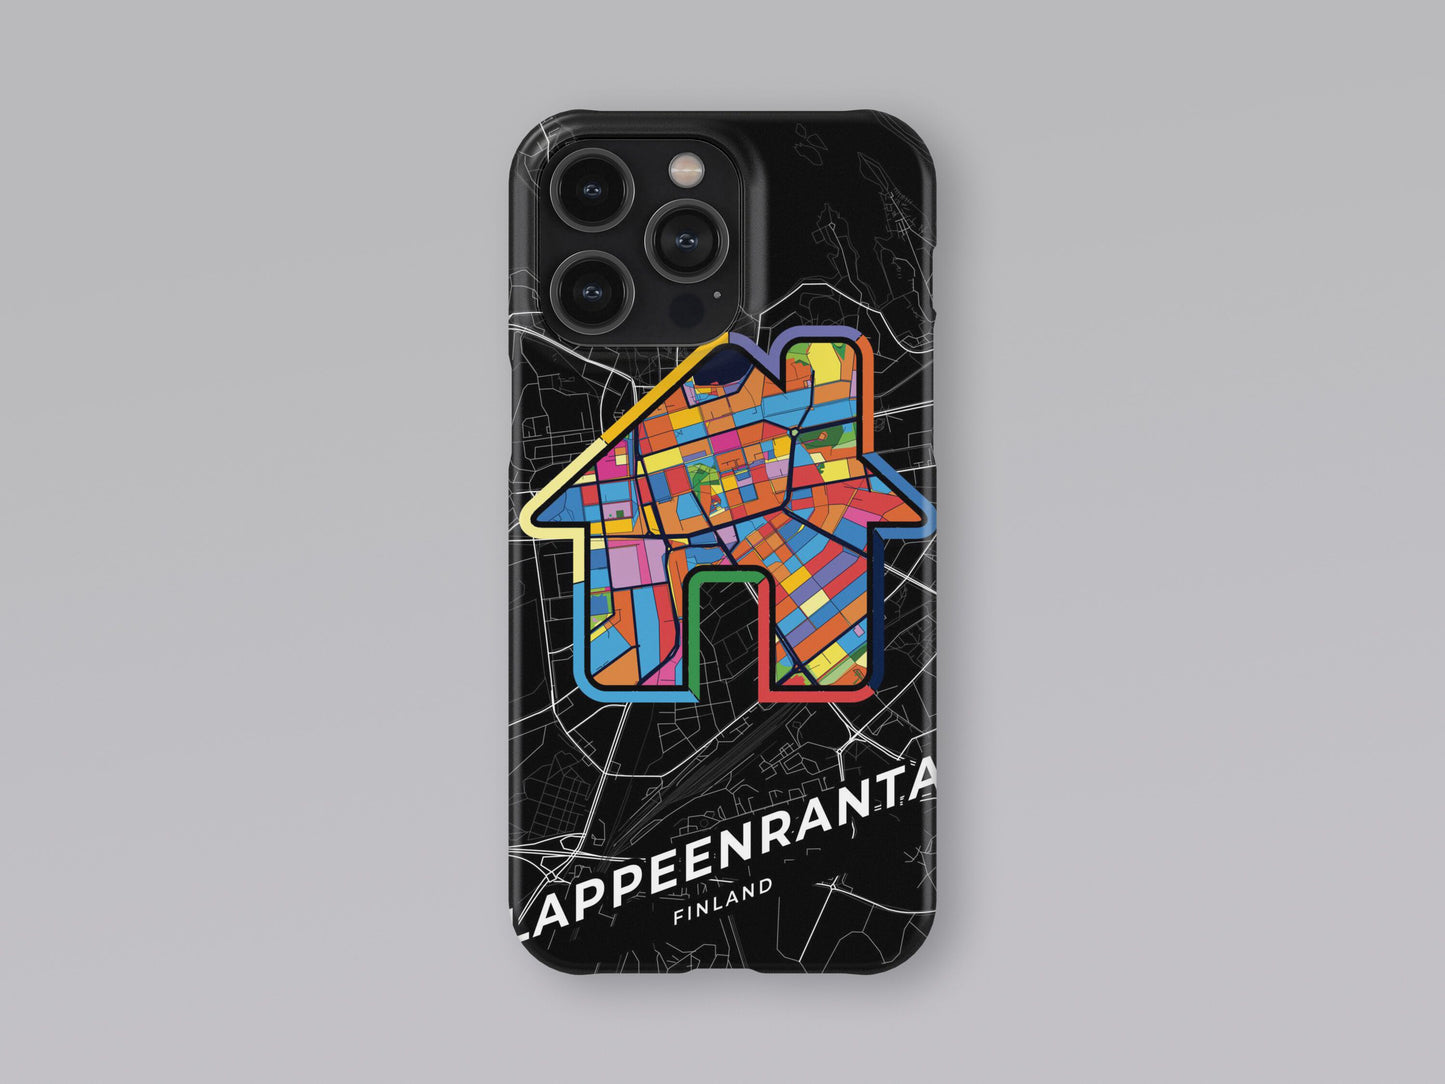 Lappeenranta Finland slim phone case with colorful icon. Birthday, wedding or housewarming gift. Couple match cases. 3